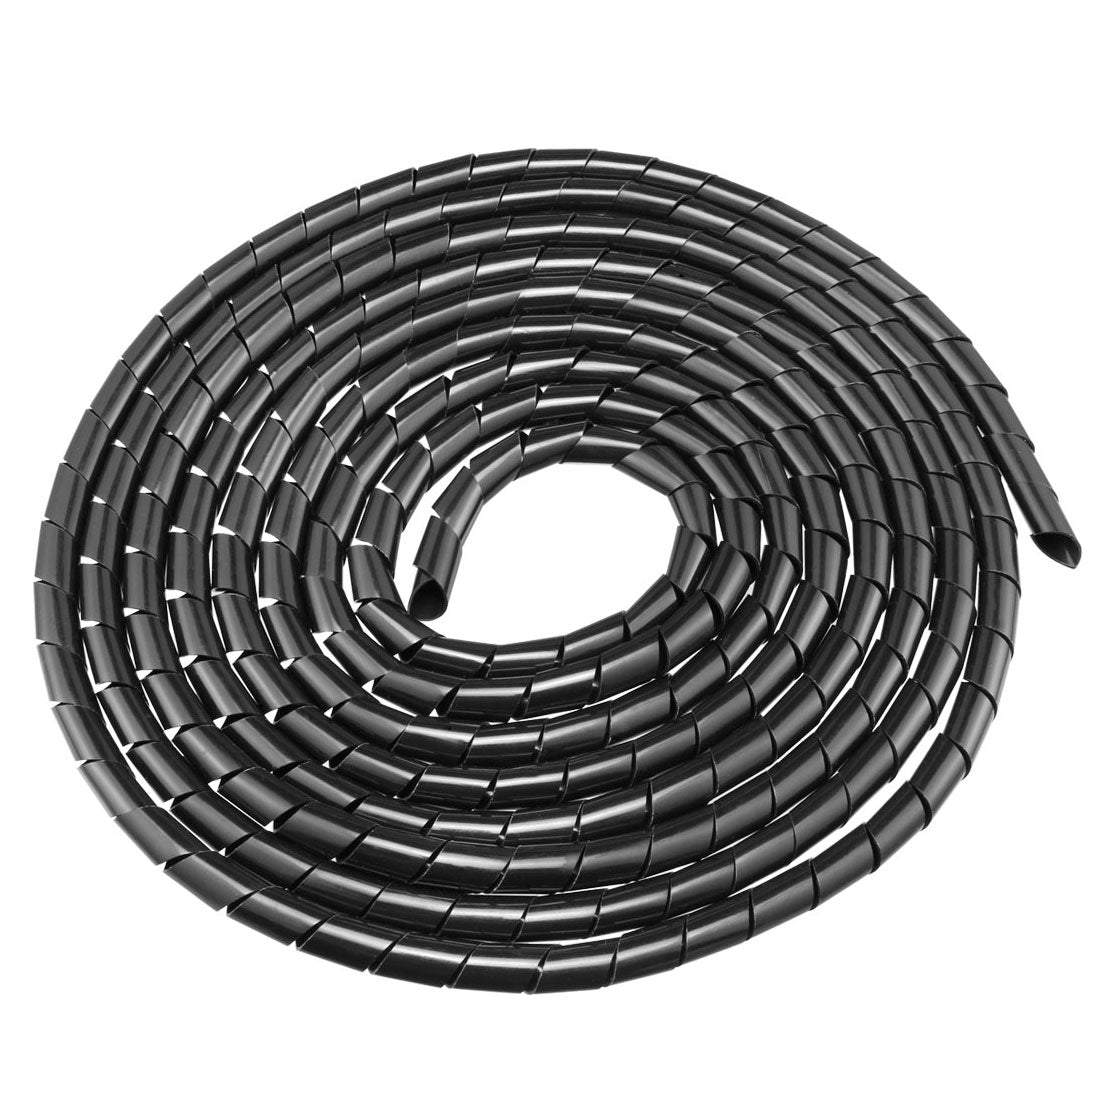 uxcell Uxcell 10mm Flexible Spiral Tube Cable Wire Wrap Computer Manage Cord 9M Length Black